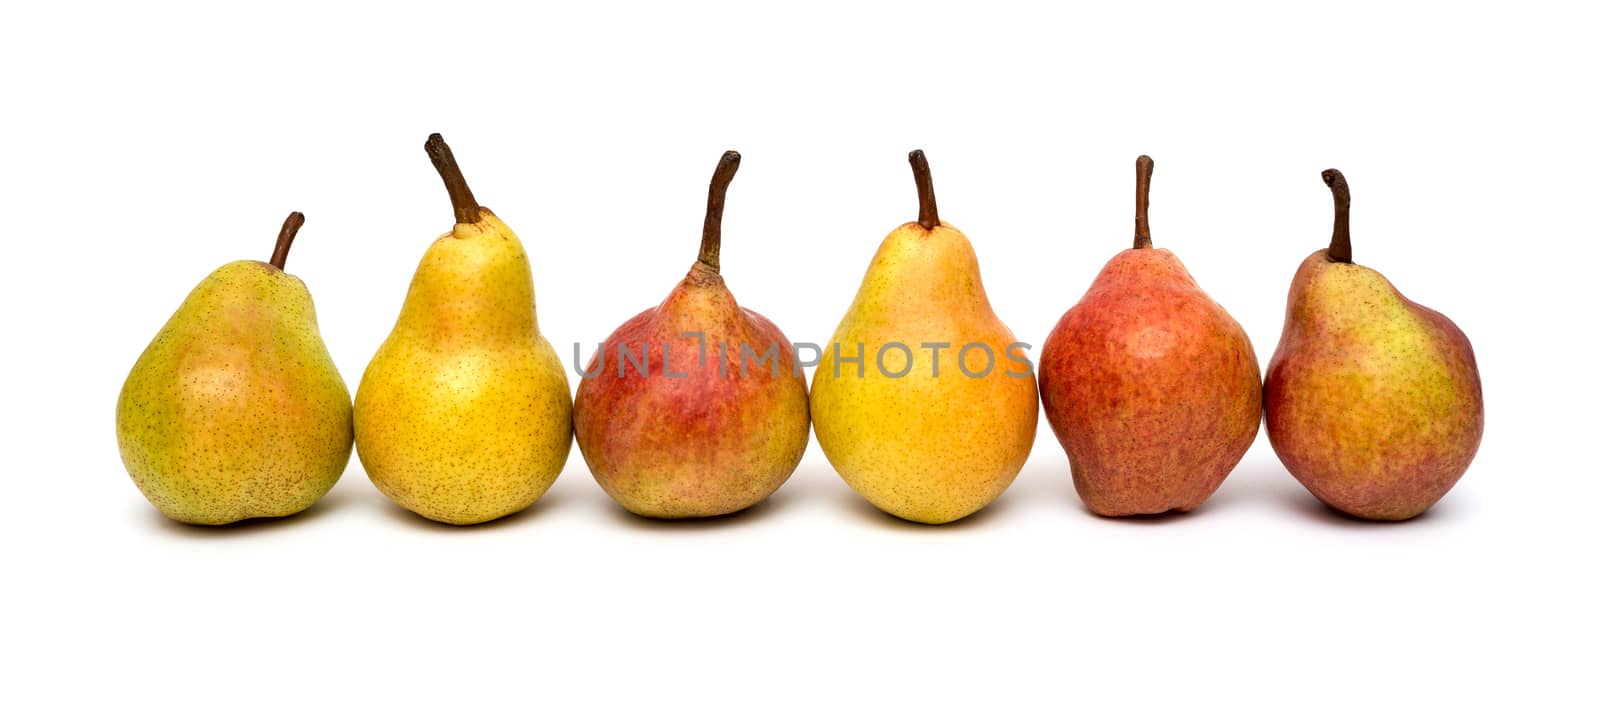 Ripe pears isolated on white background by DNKSTUDIO